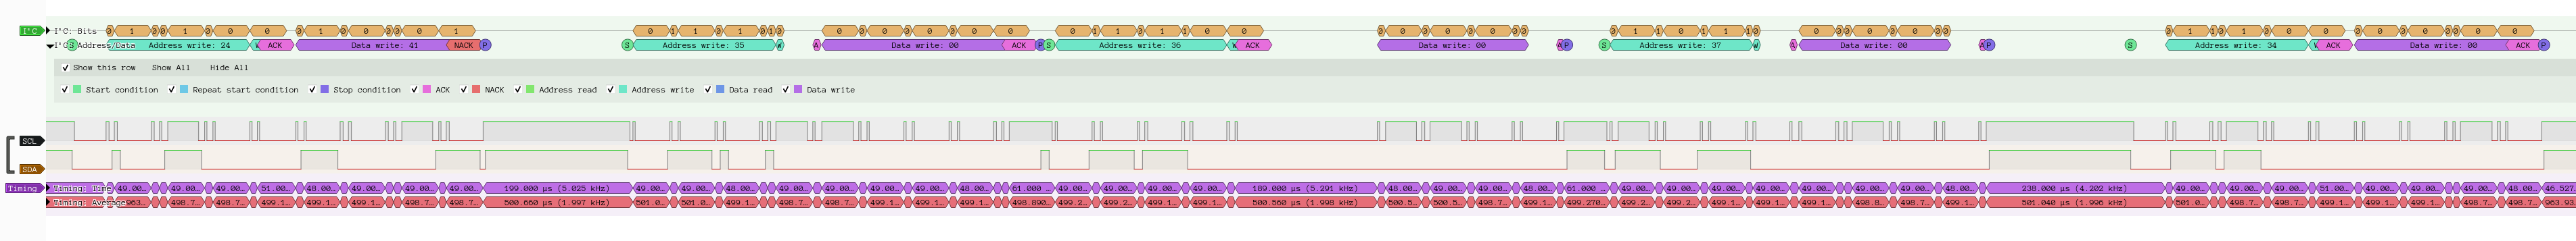 A screenshot from Pulseview showing a single burst of communication, showing data being sent to at least 5 i2c devices